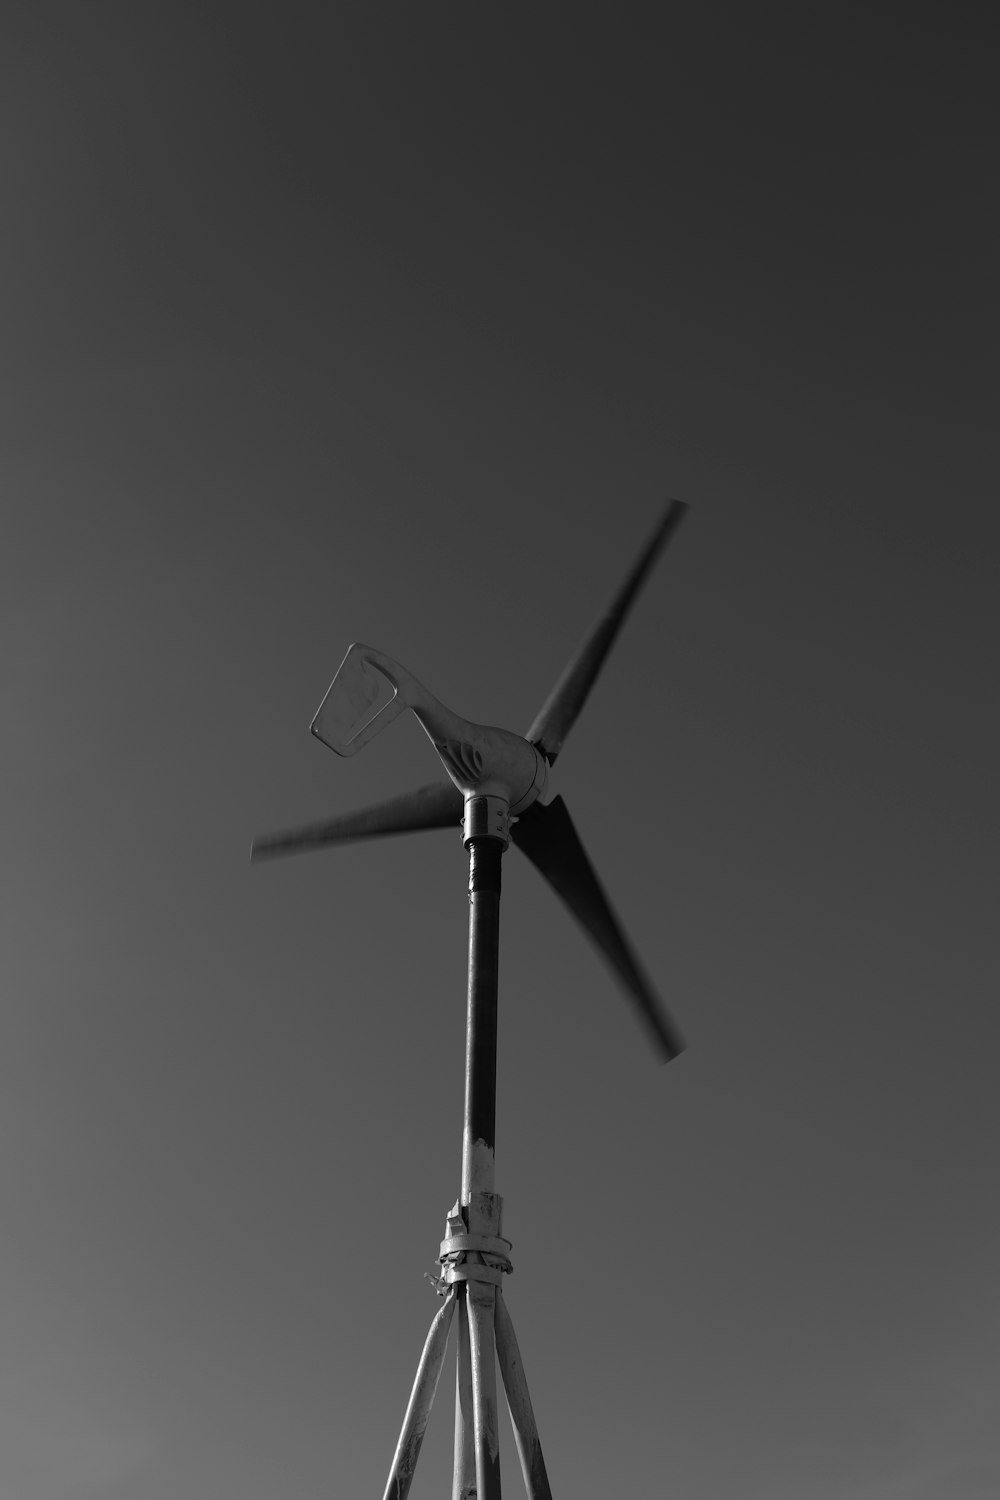 a windmill with a black background